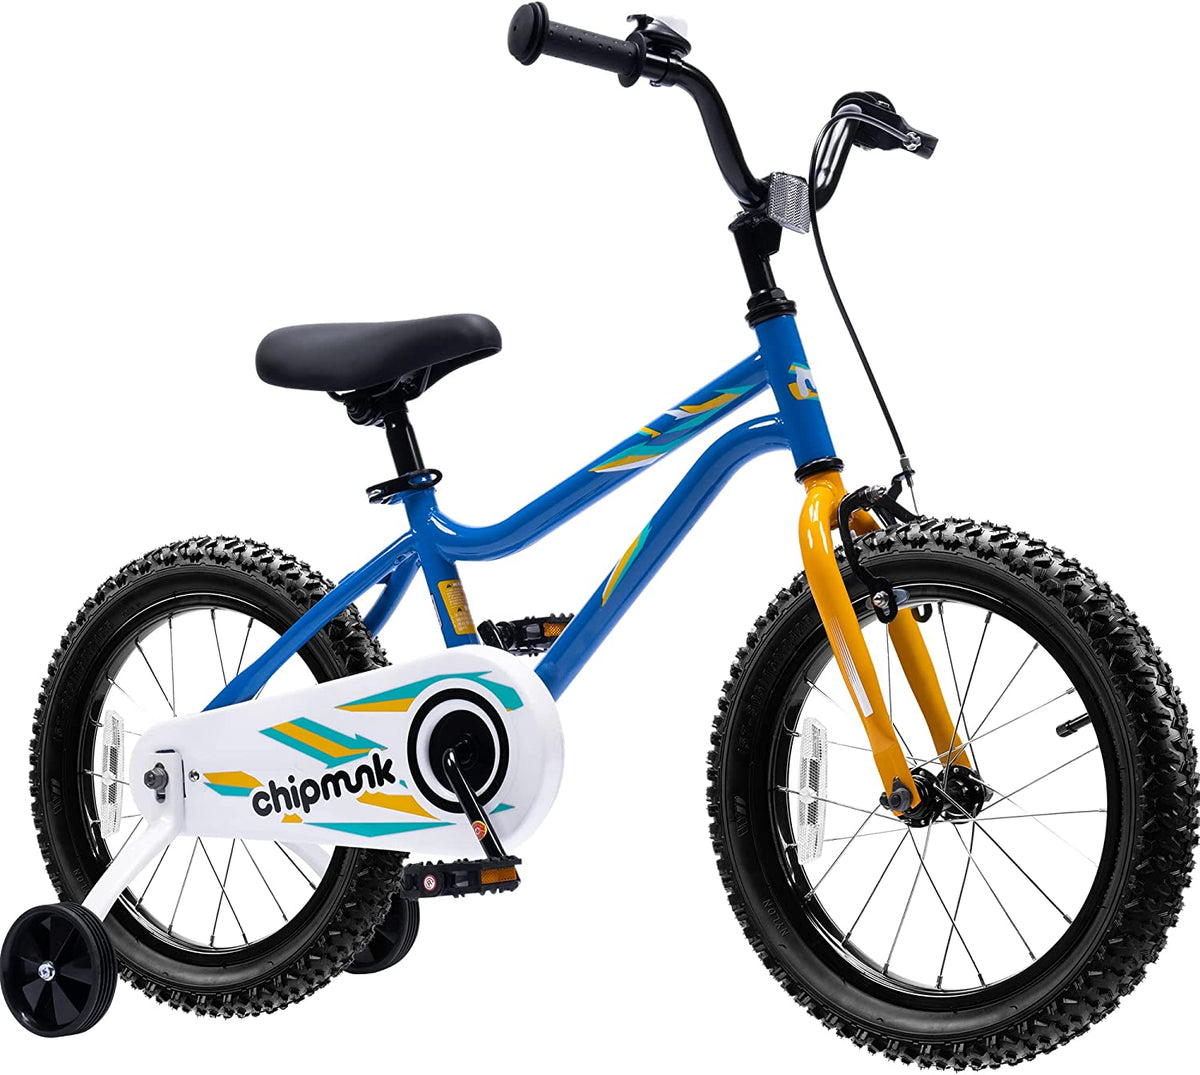 RoyalBaby-Chipmunk-Kids-Bike-Boys-Girls-14-16-18-Inch-Bicycle-for-Ages-4-9-Years-Training-Wheels-Options-Multiple-Colors